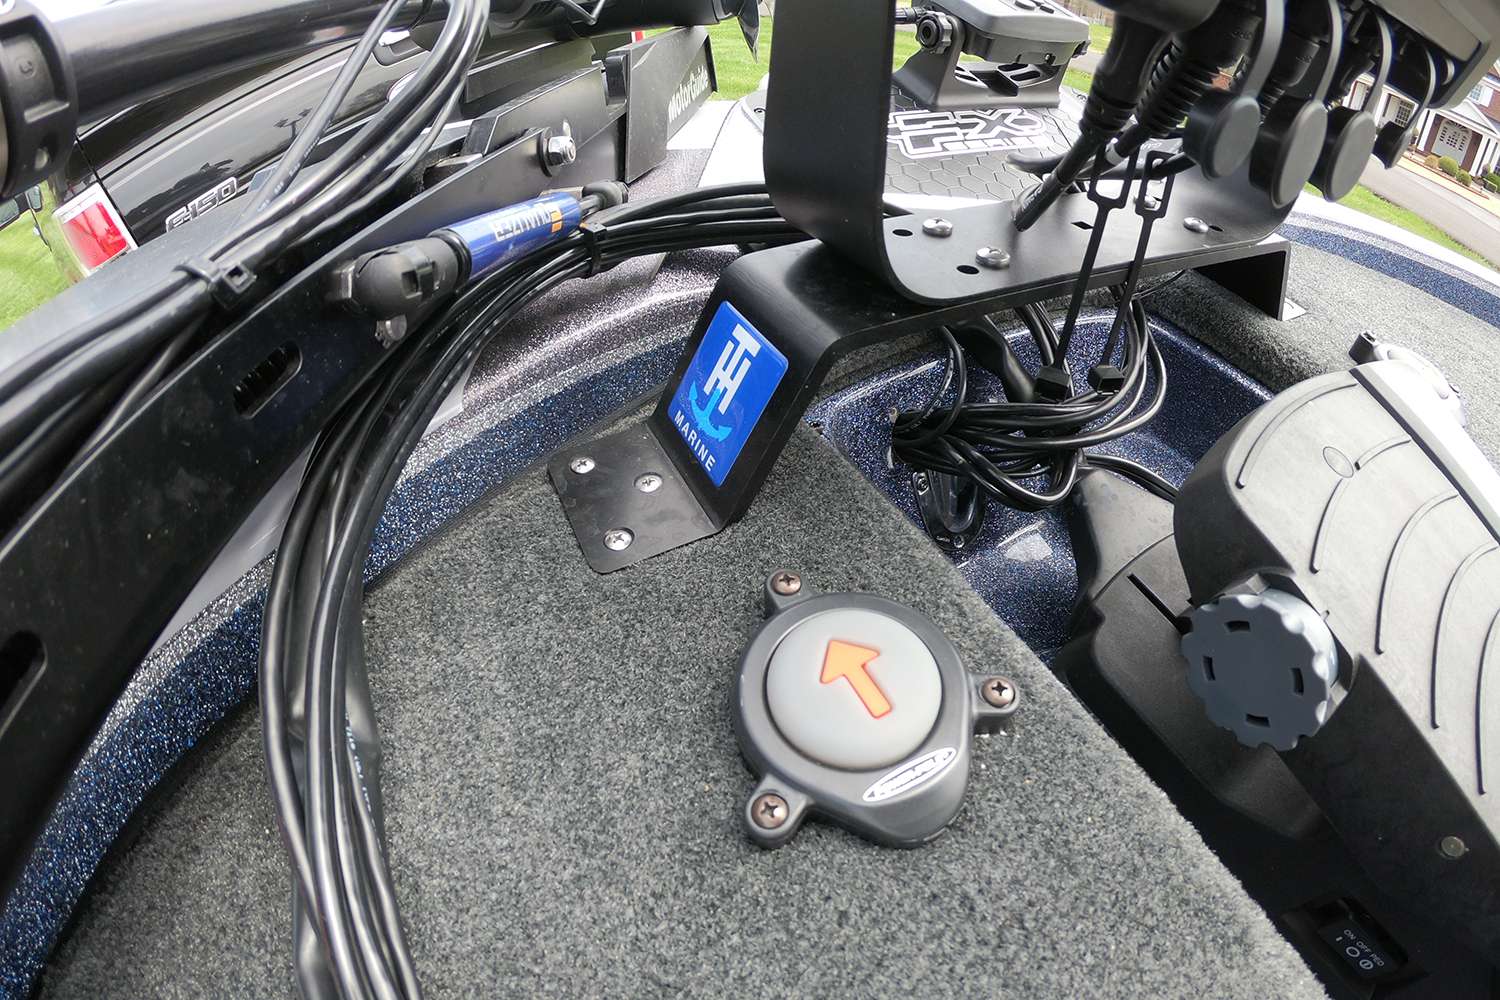 To the left of the trolling motor pedal is a Power-Pole button and a look at the mounting base for his Garmin electronics.